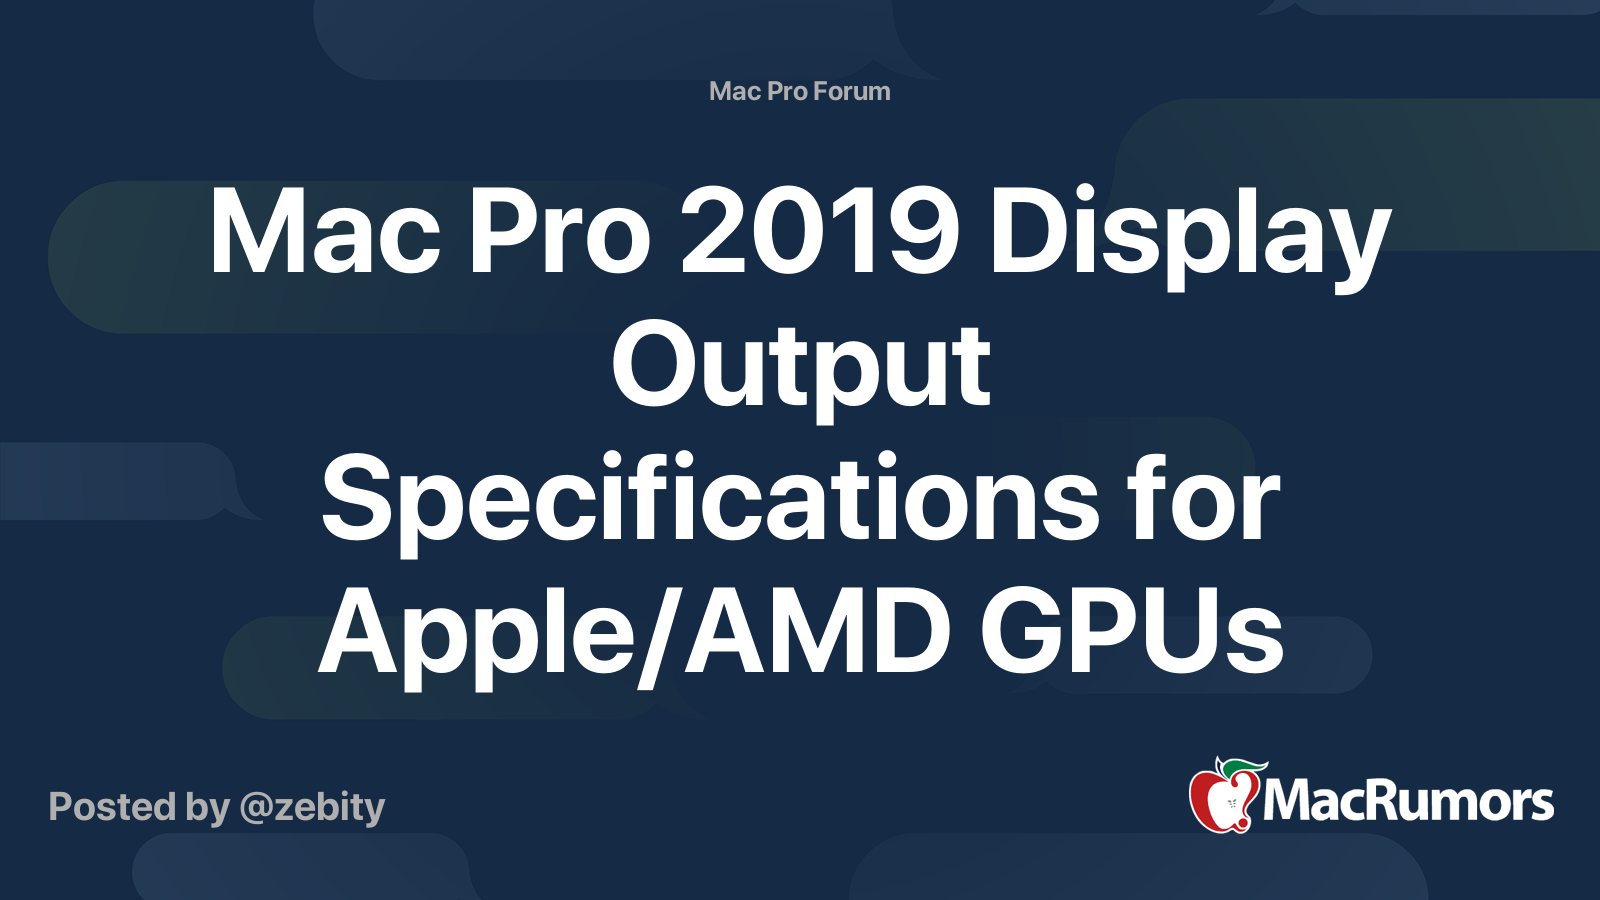 Mac Pro 2019 Display Output Specifications for Apple/AMD GPUs - MacRumors